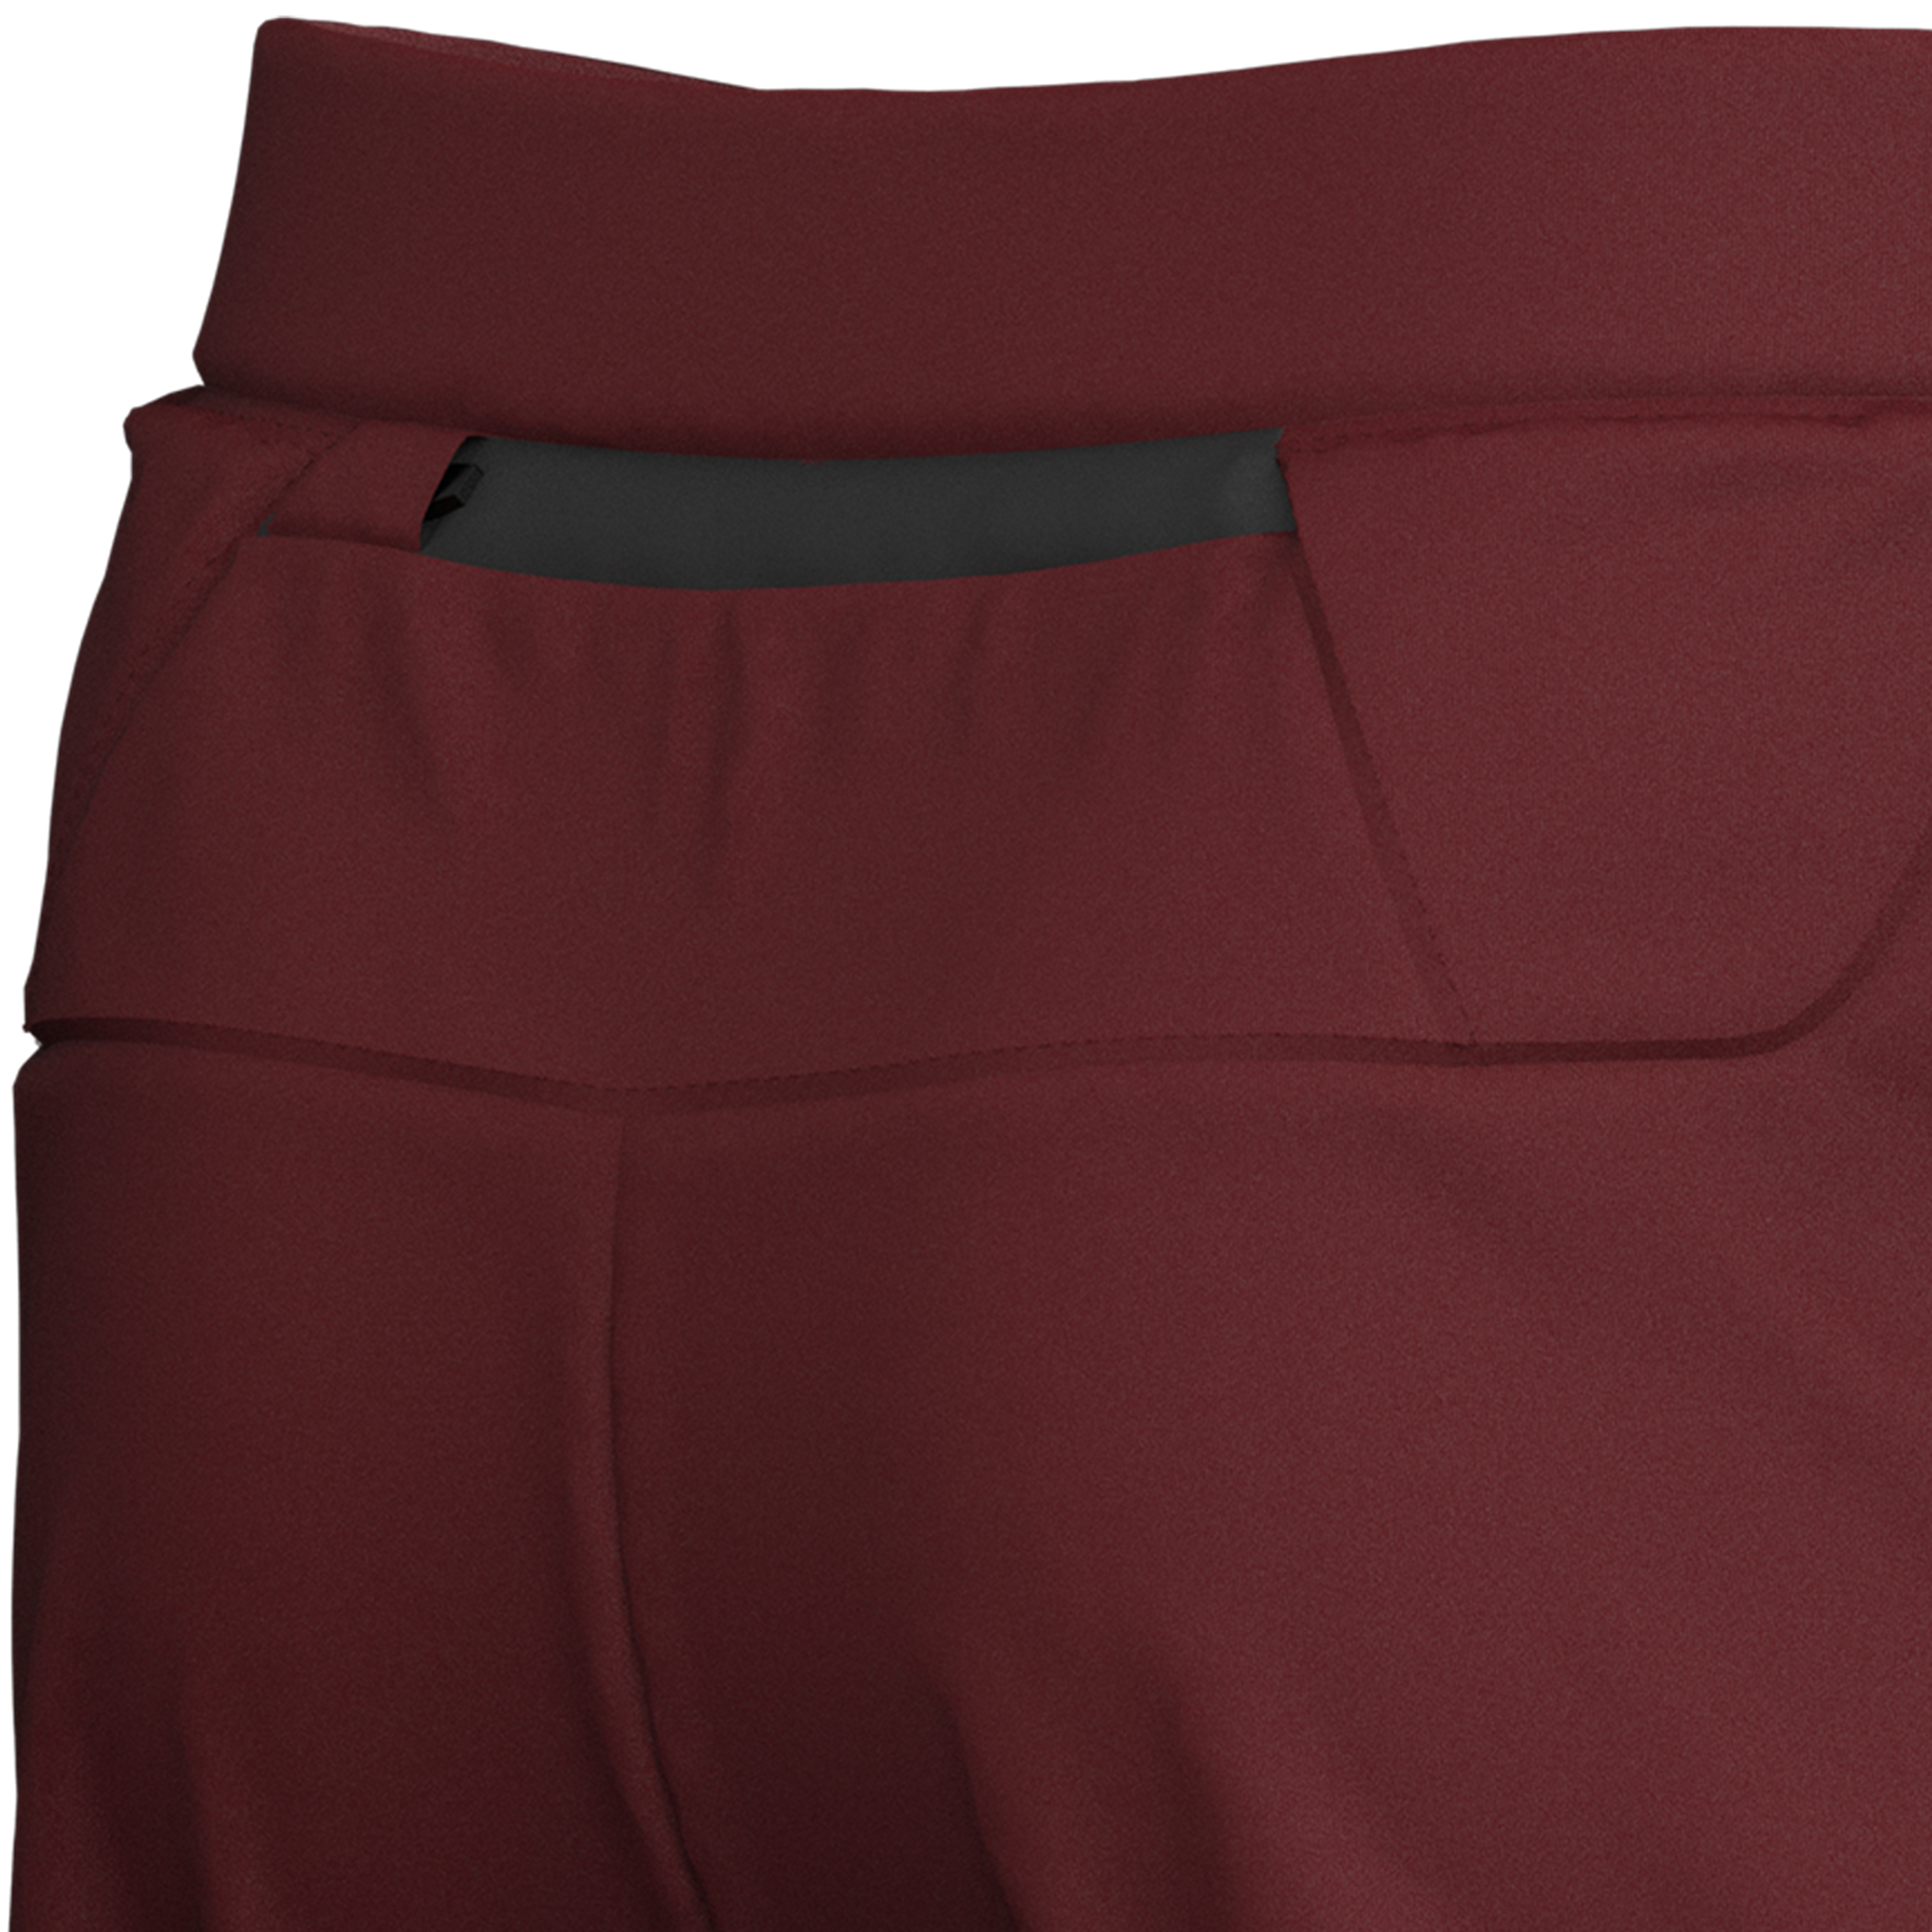 Burgundy Polyester Running Shorts, 7-Inch for Cycling and Fitness Workout by Sporty Clad